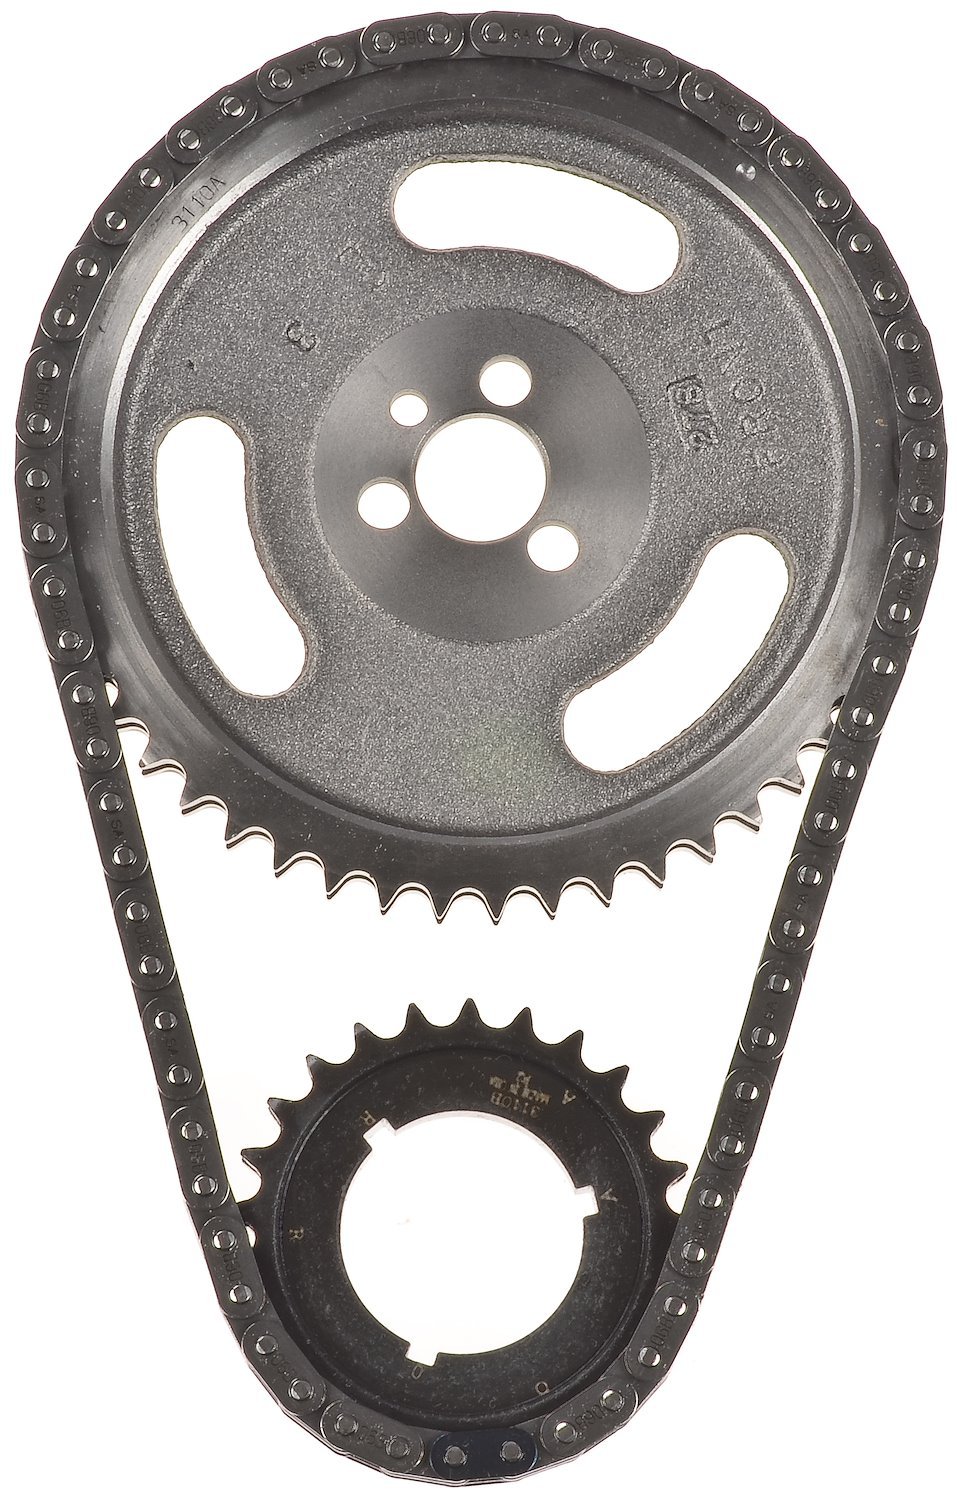 Timing Chain Set for 1968-1990 Big Block Chevy